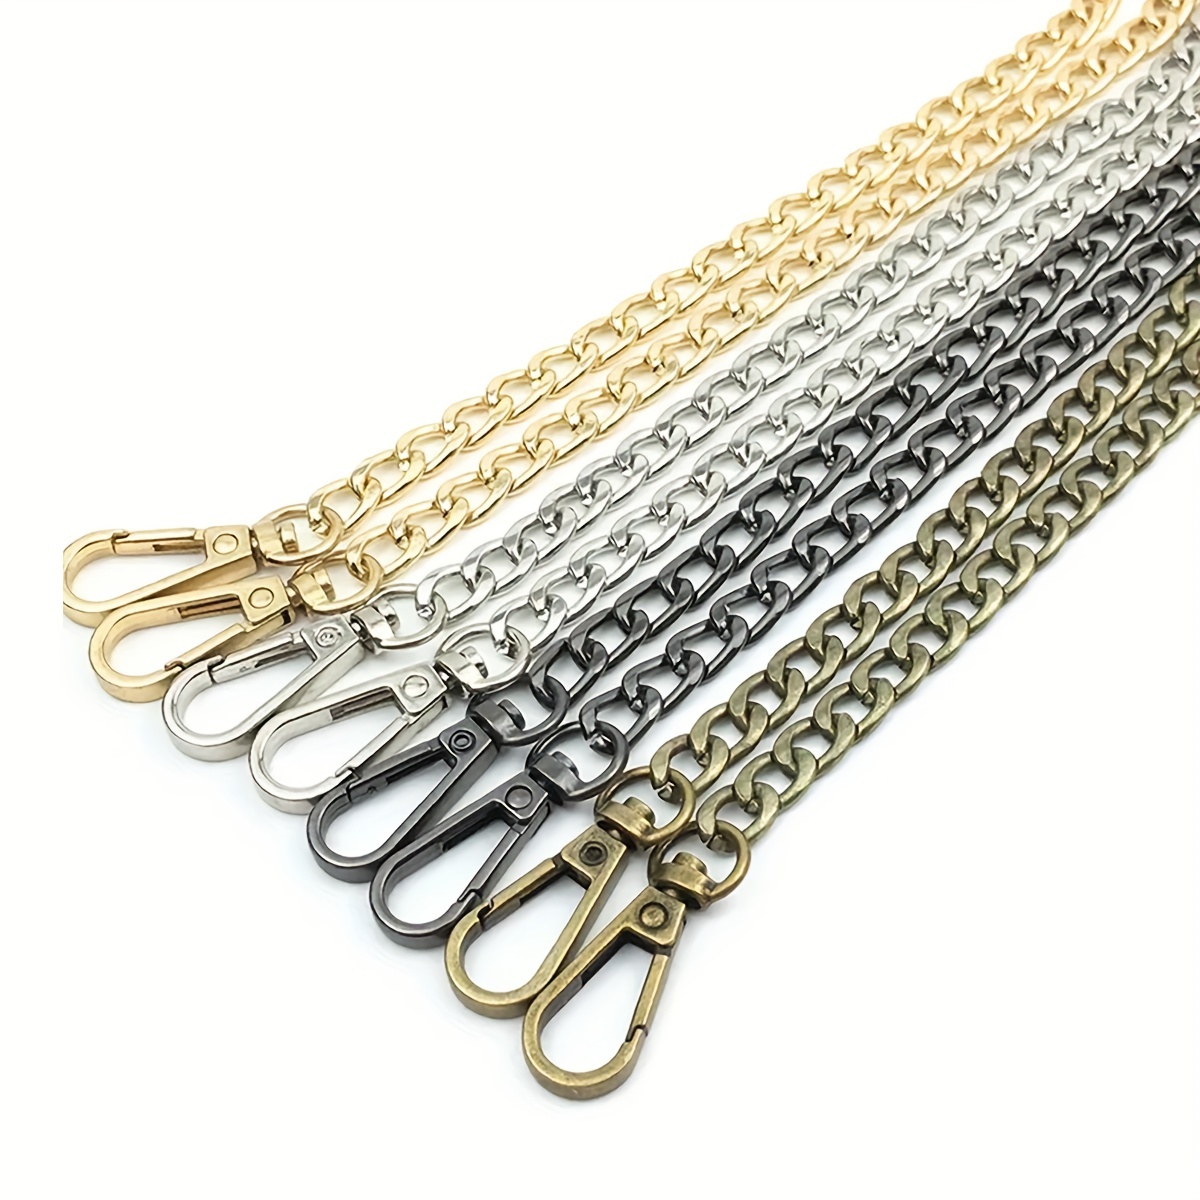 2 Pieces Handbag Chain Straps Replacement Strap Accessories Purse Handbag  Charms Chain Accessories Purse Clutches Handle Chains Decor with Clasp for